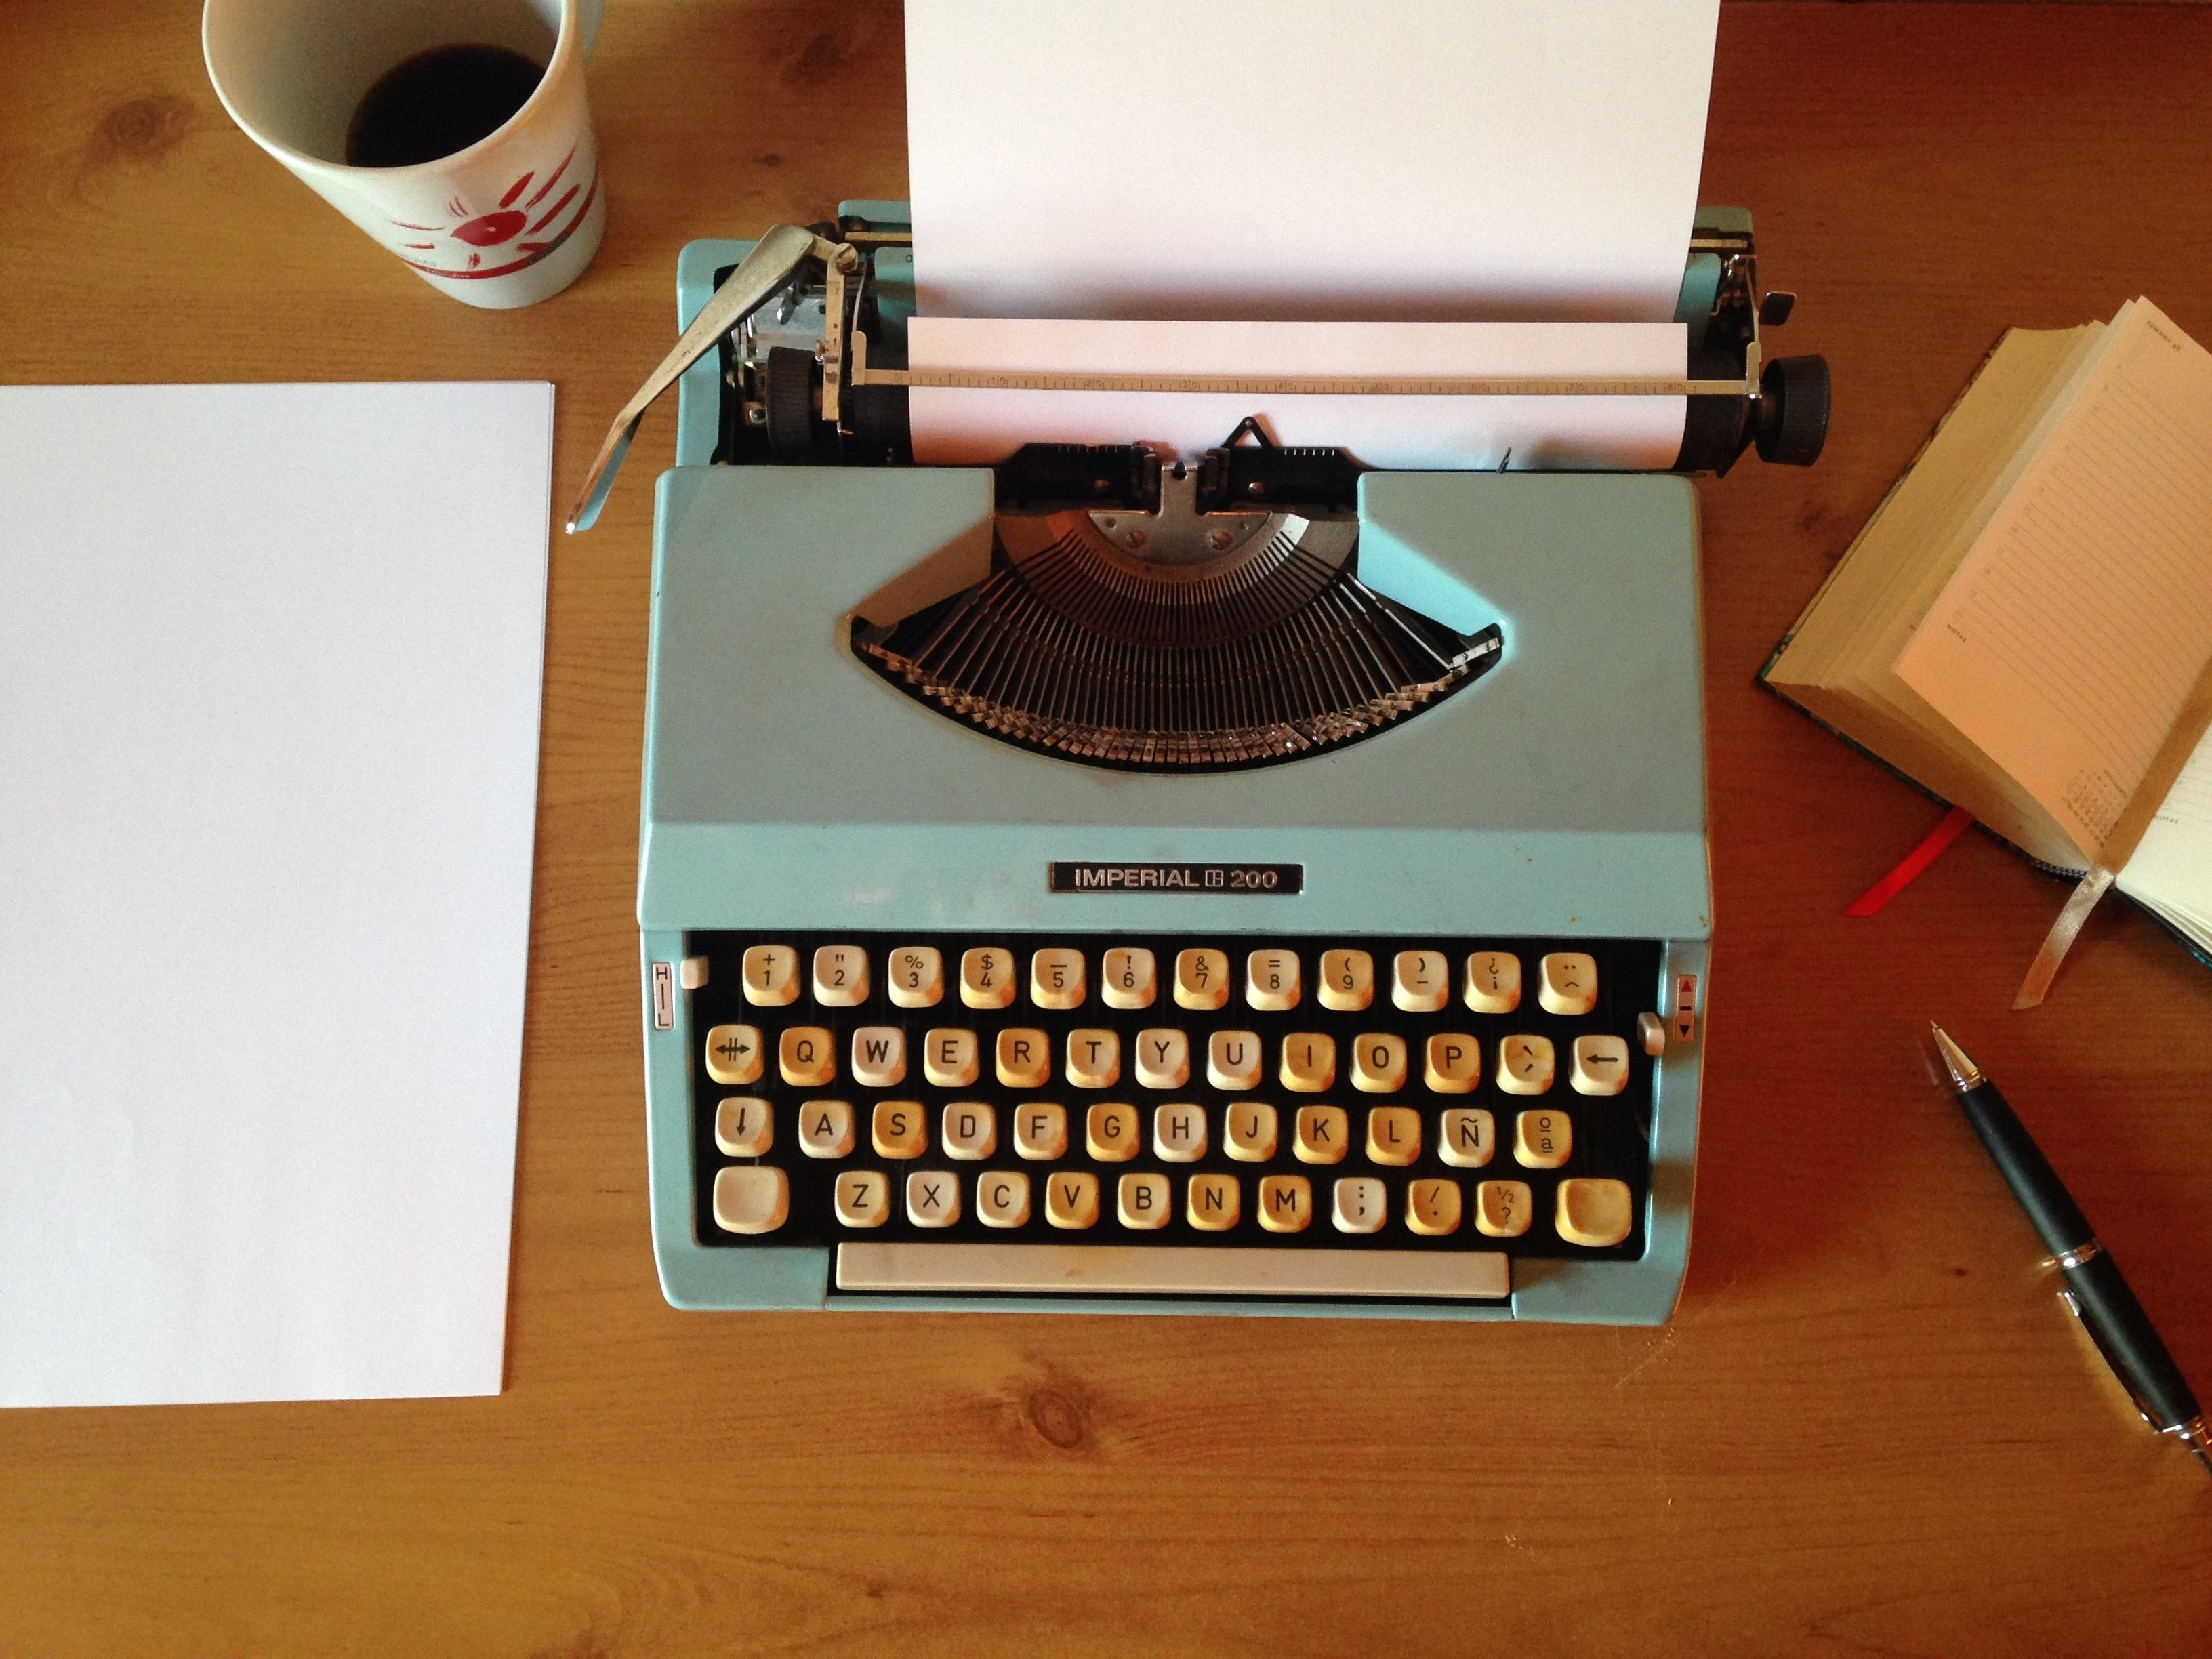 a typewriter sits on a wooden desk beside a cup of coffee